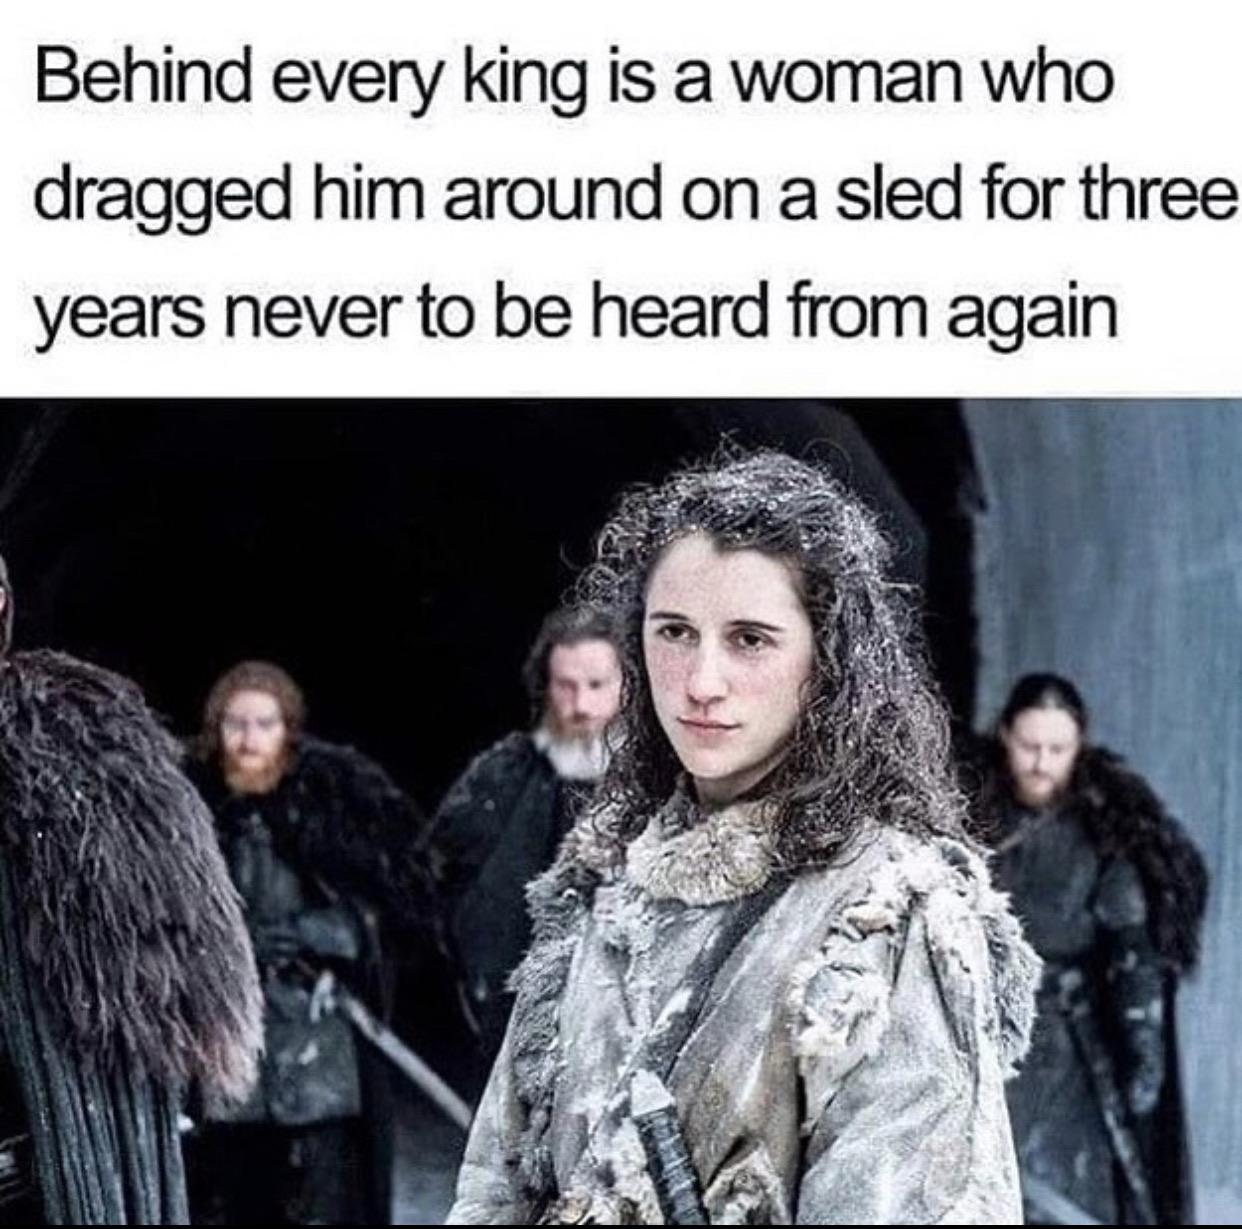 Game of thrones, Meera, Bran, Jon, Howland Reed, Jon Snow Game of thrones memes Game of thrones, Meera, Bran, Jon, Howland Reed, Jon Snow text: Behind every king is a woman who dragged him around on a sled for three years never to be heard from again 